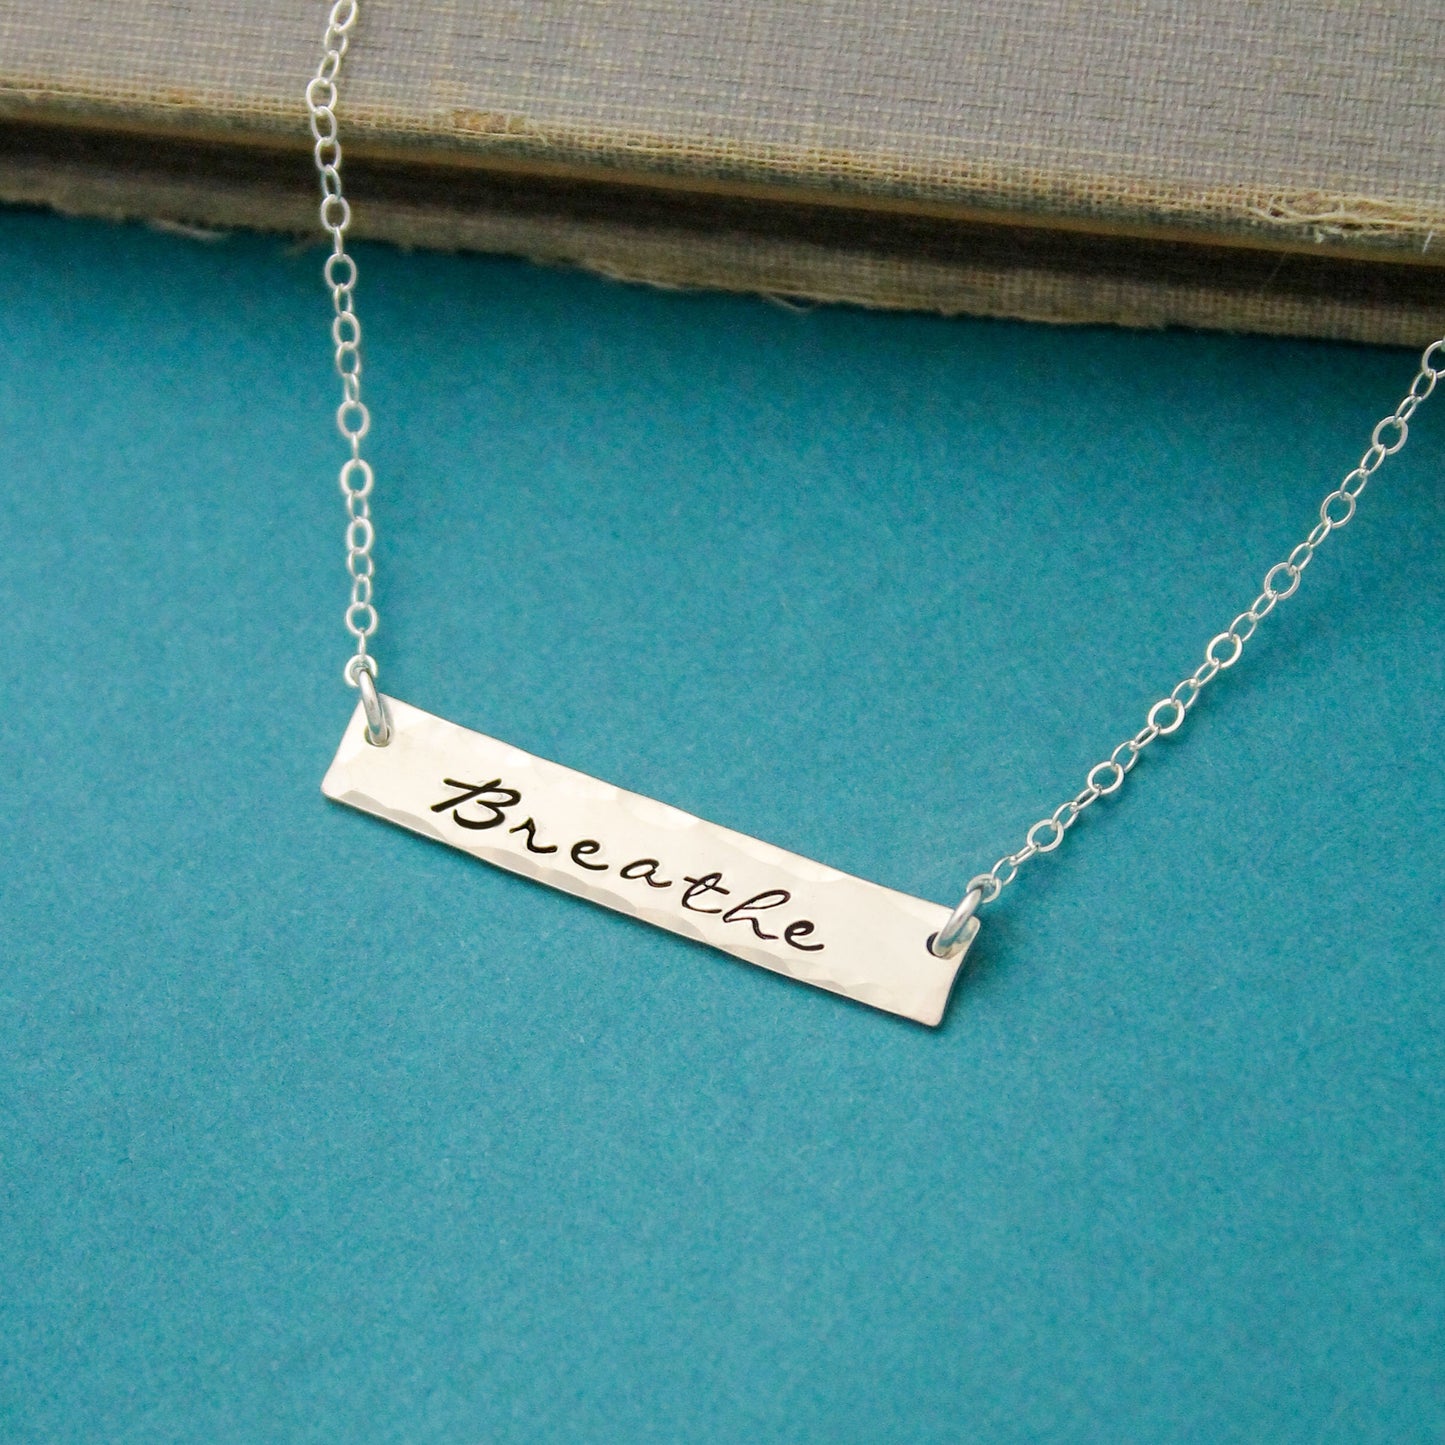 Sterling Silver Breathe Bar Necklace, Just Breathe Necklace, Personalized Bar Necklace, Silver Bar Necklace, Unique Hand Stamped Jewelry